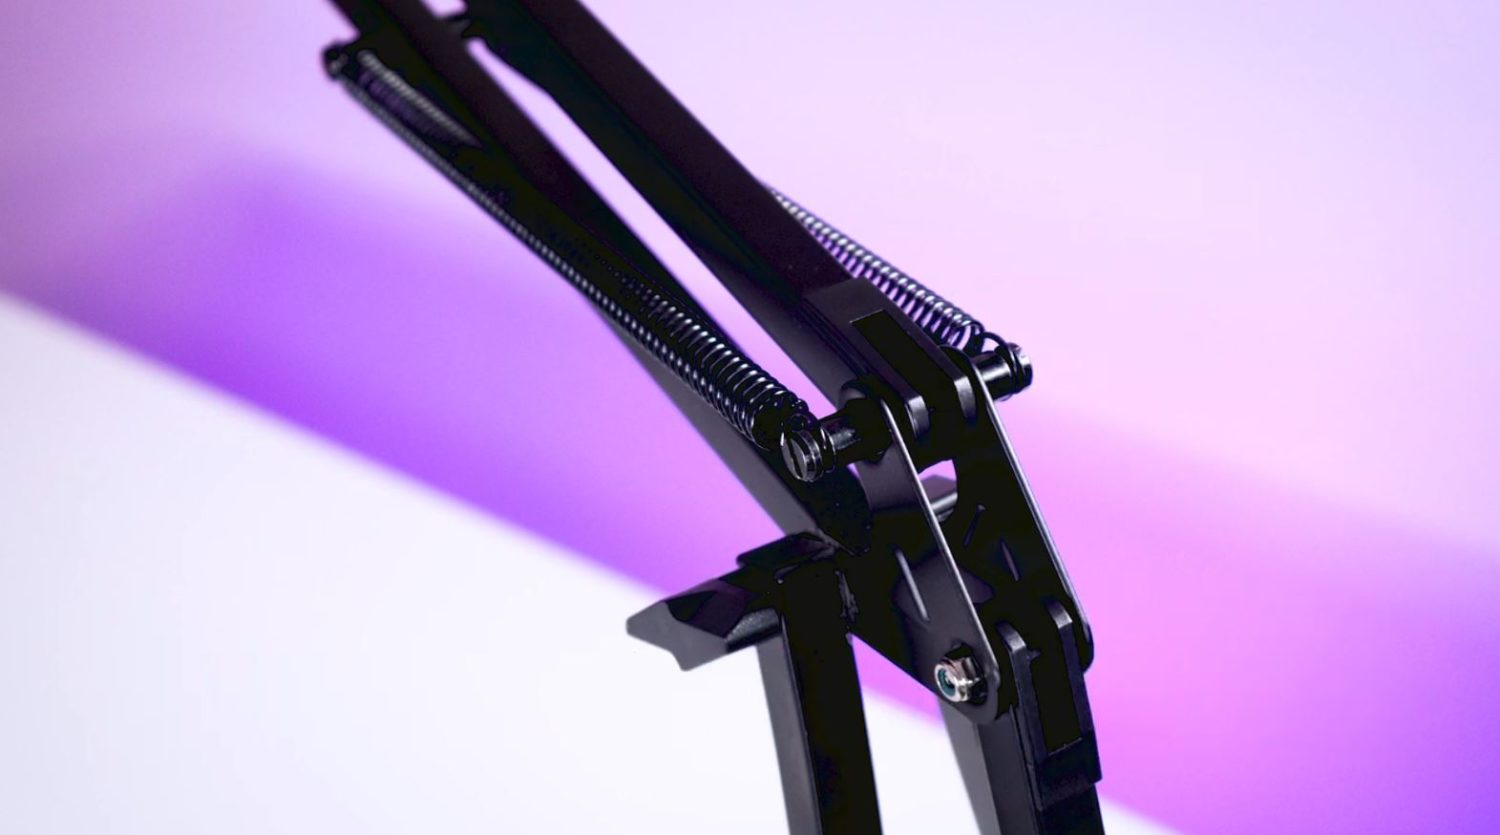 Tonor T20 Microphone Boom Arm review - spring